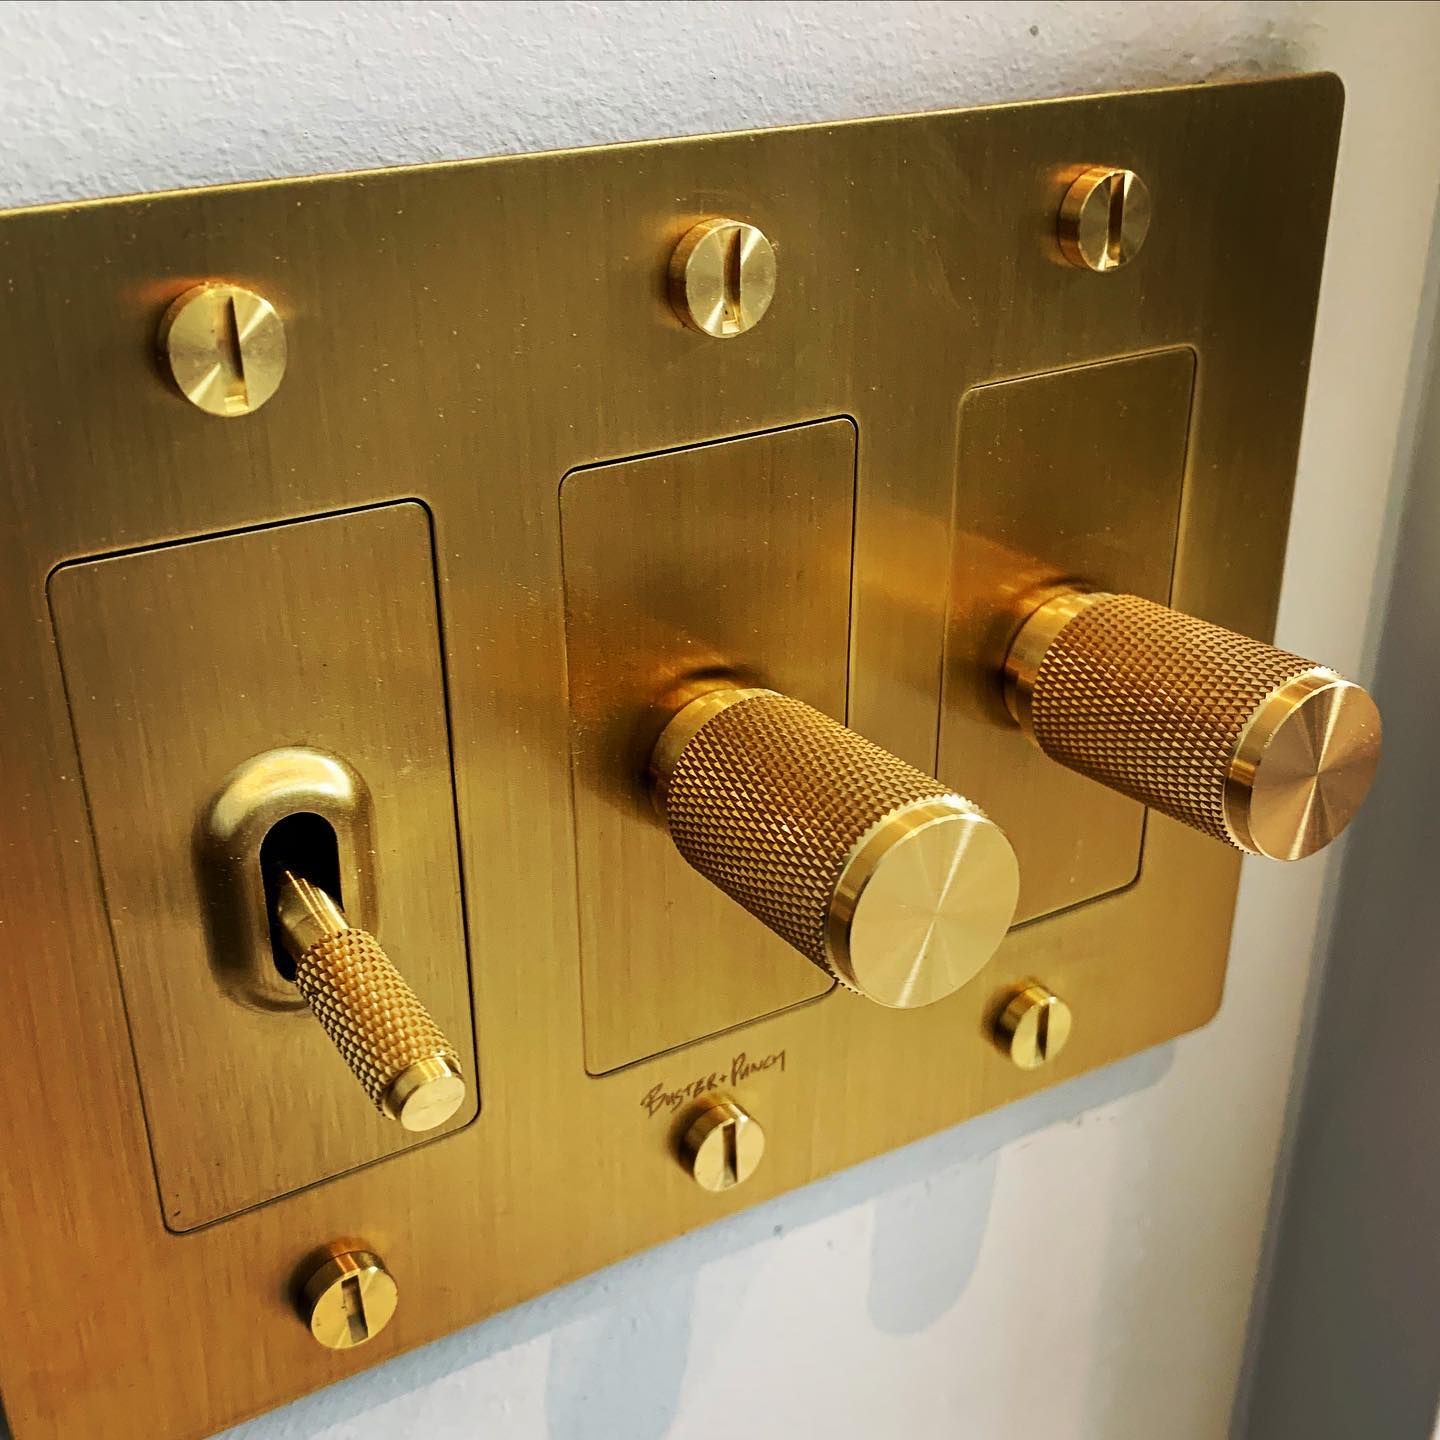 Electronic light switch in gold